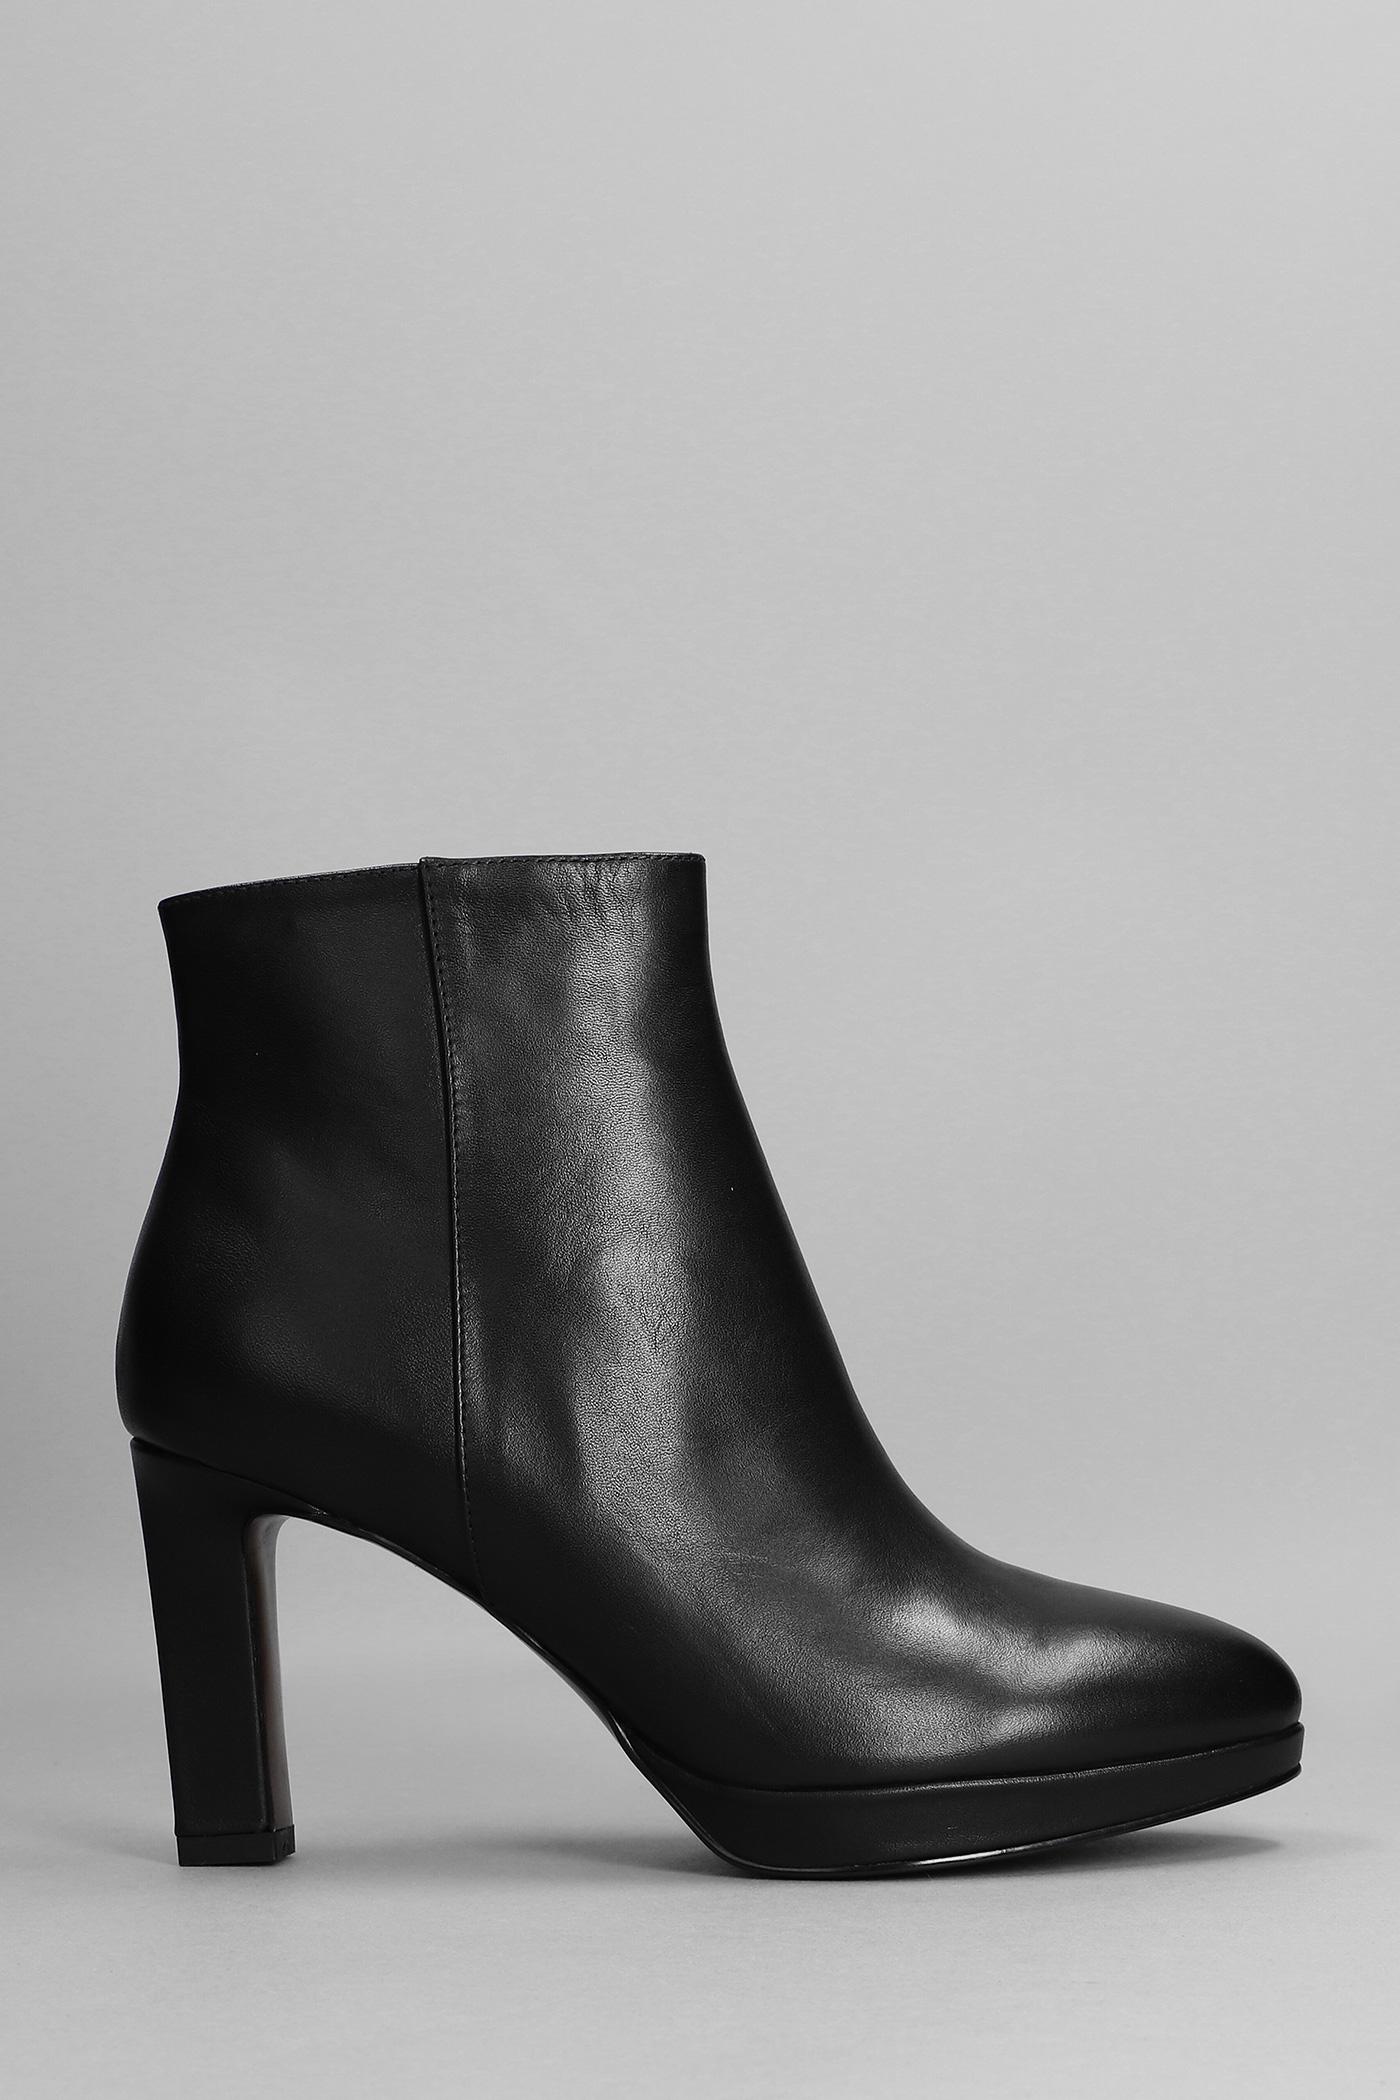 Bibi Lou High Heels Ankle Boots In Black Leather | Lyst